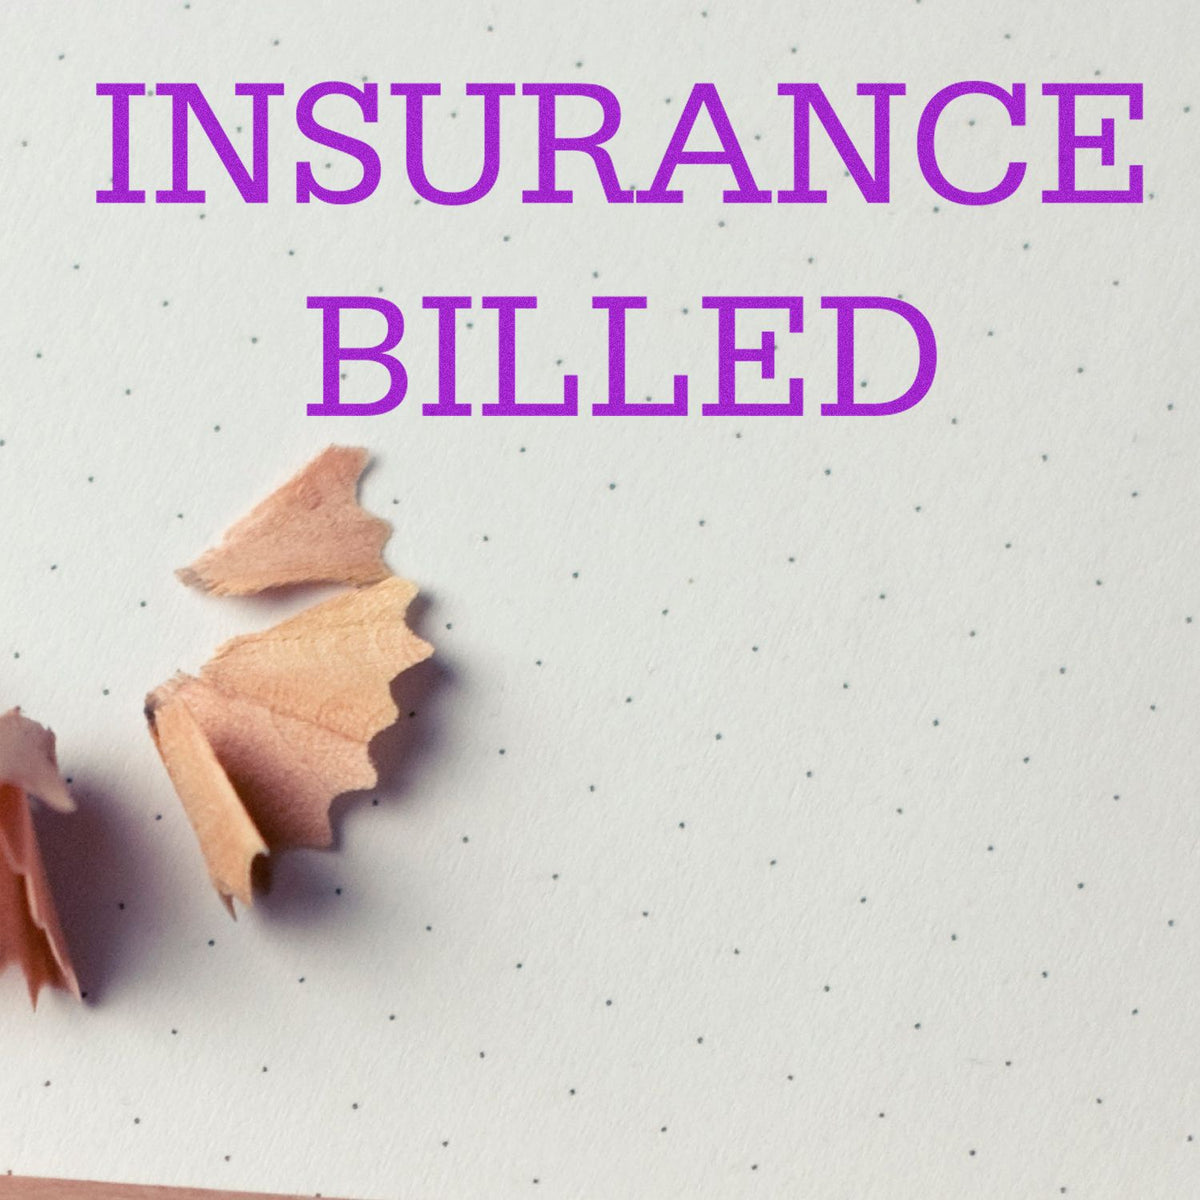 Insurance Billed Rubber Stamp In Use